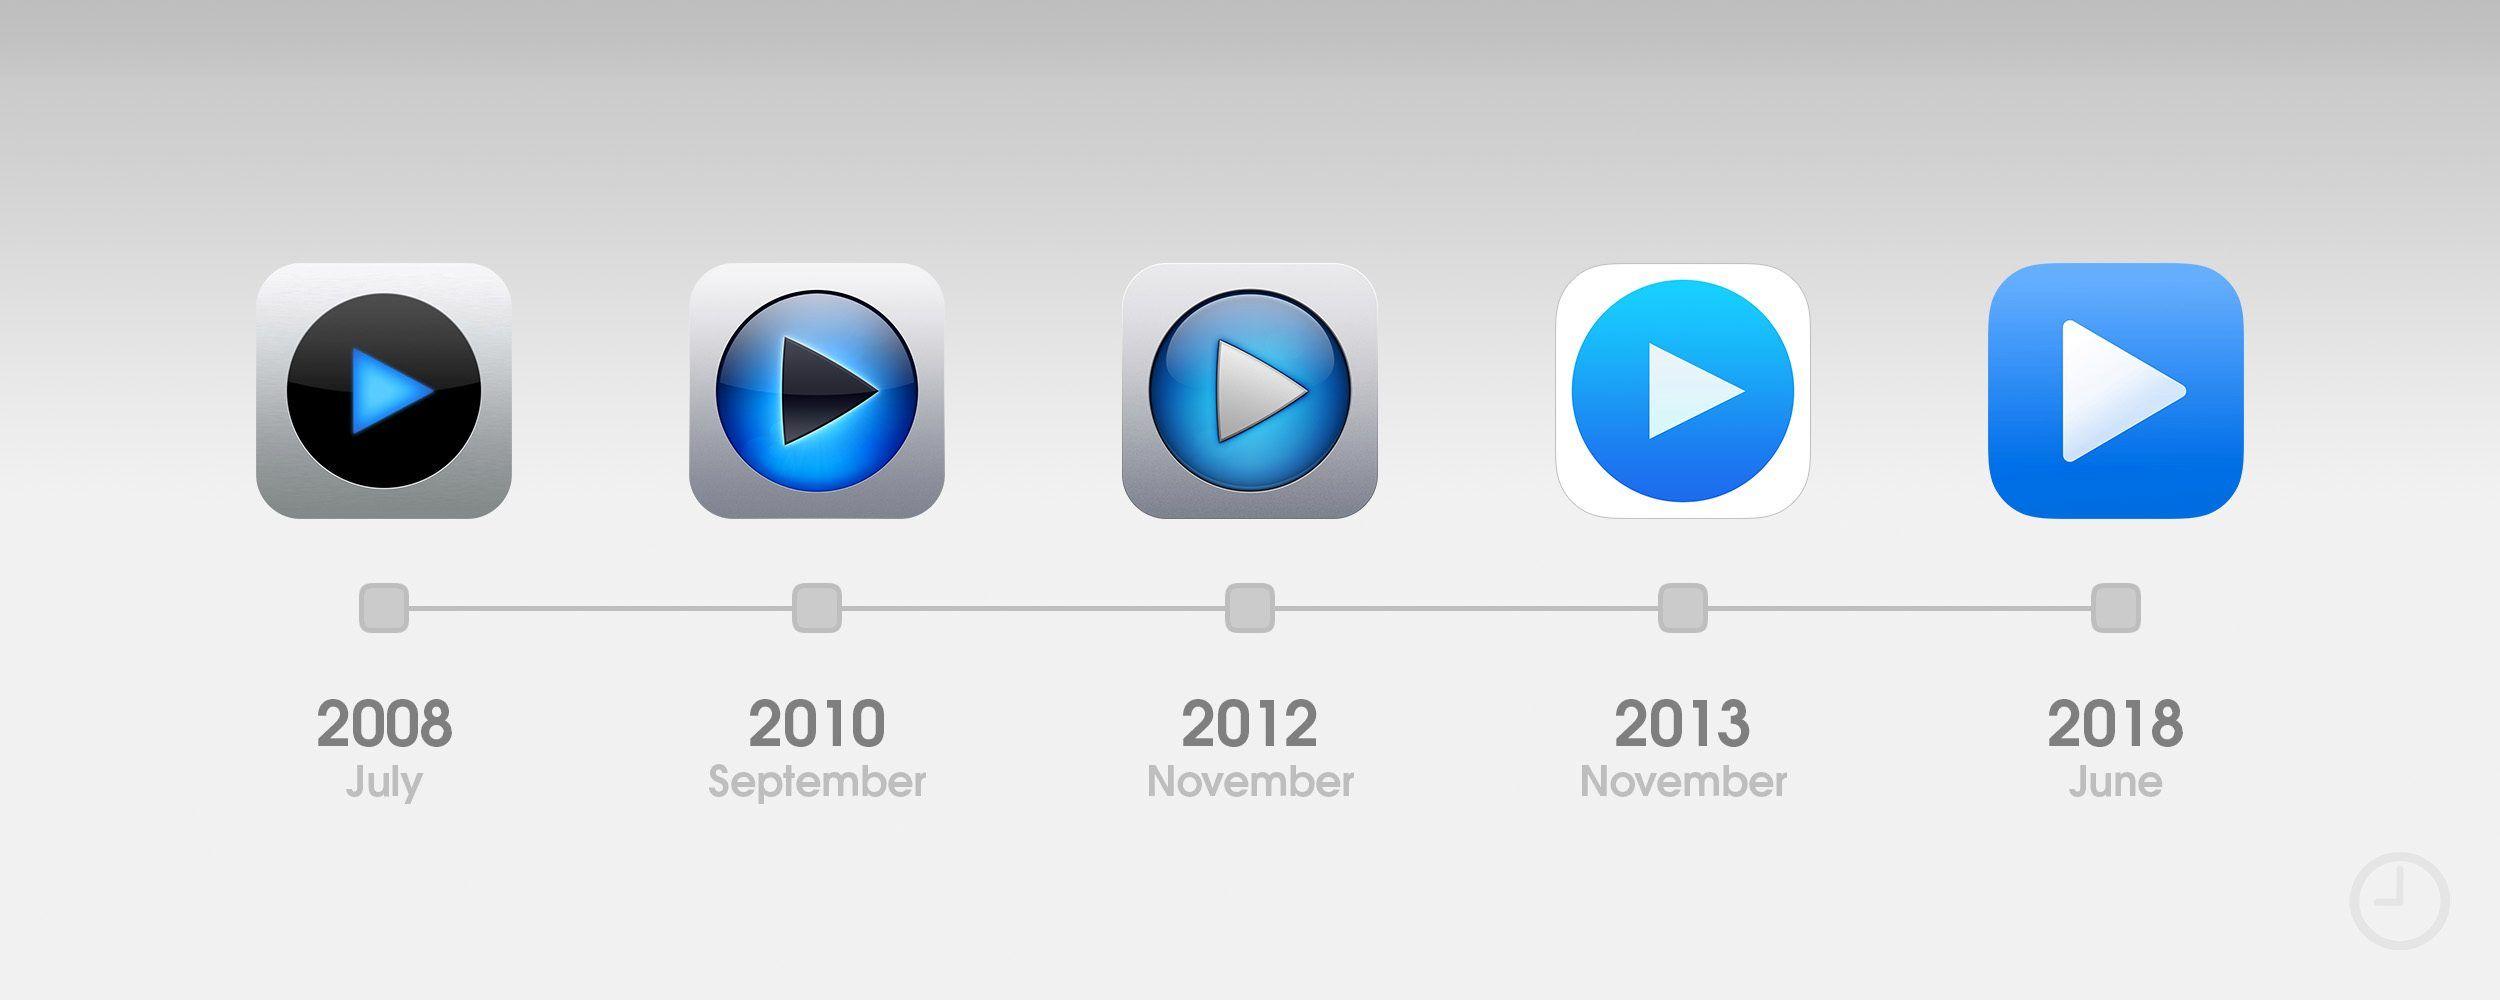 iTunes App Logo - 10 years of the App Store: The design evolution of the earliest apps ...